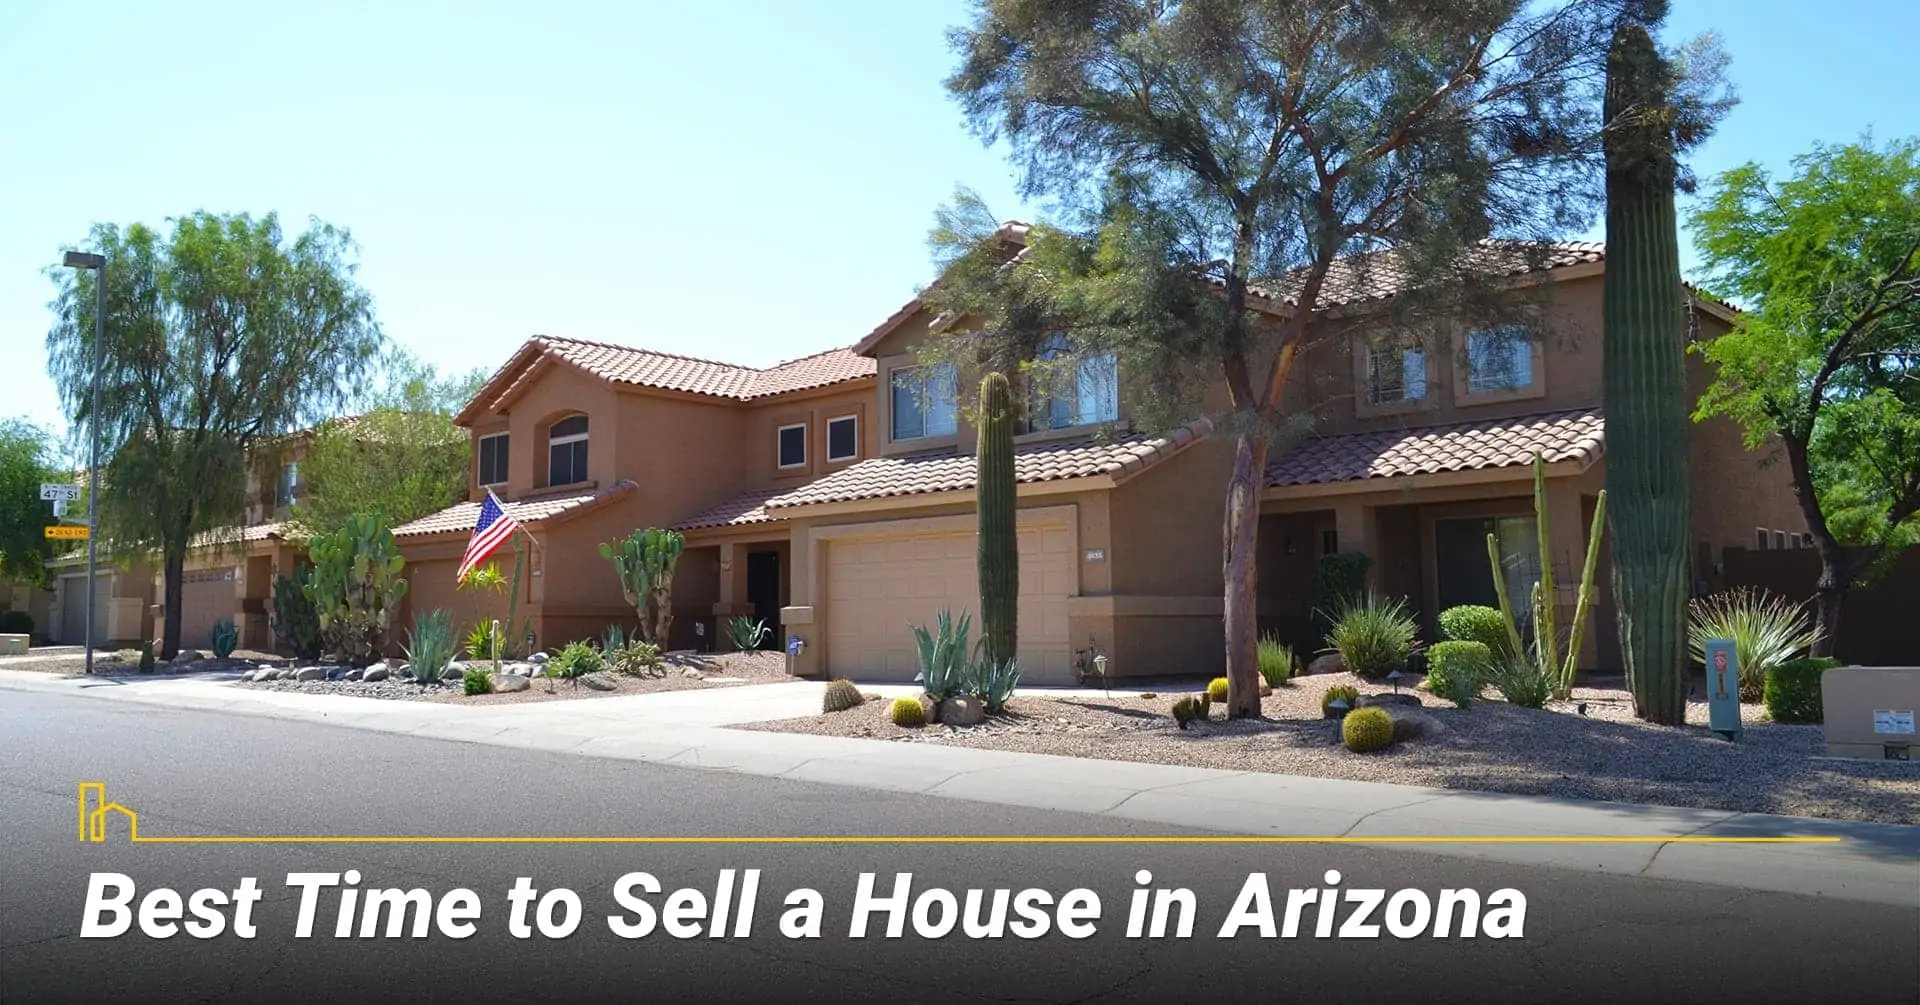 Best Time to Sell a House in Arizona, Spring is the best time to sell a house in Arizona